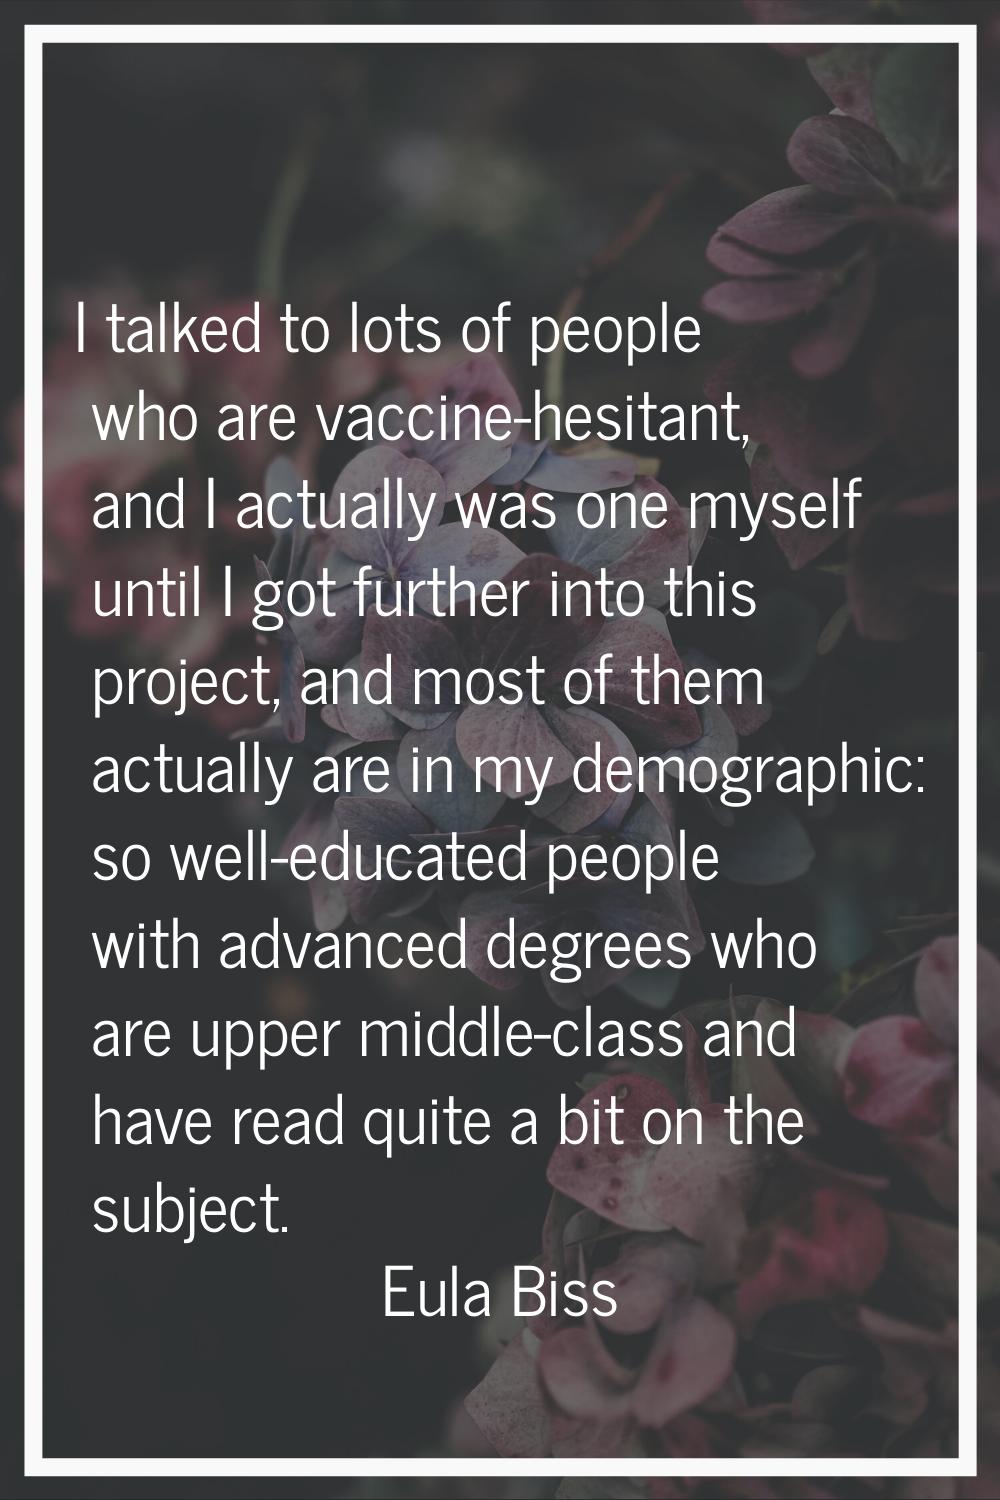 I talked to lots of people who are vaccine-hesitant, and I actually was one myself until I got furt